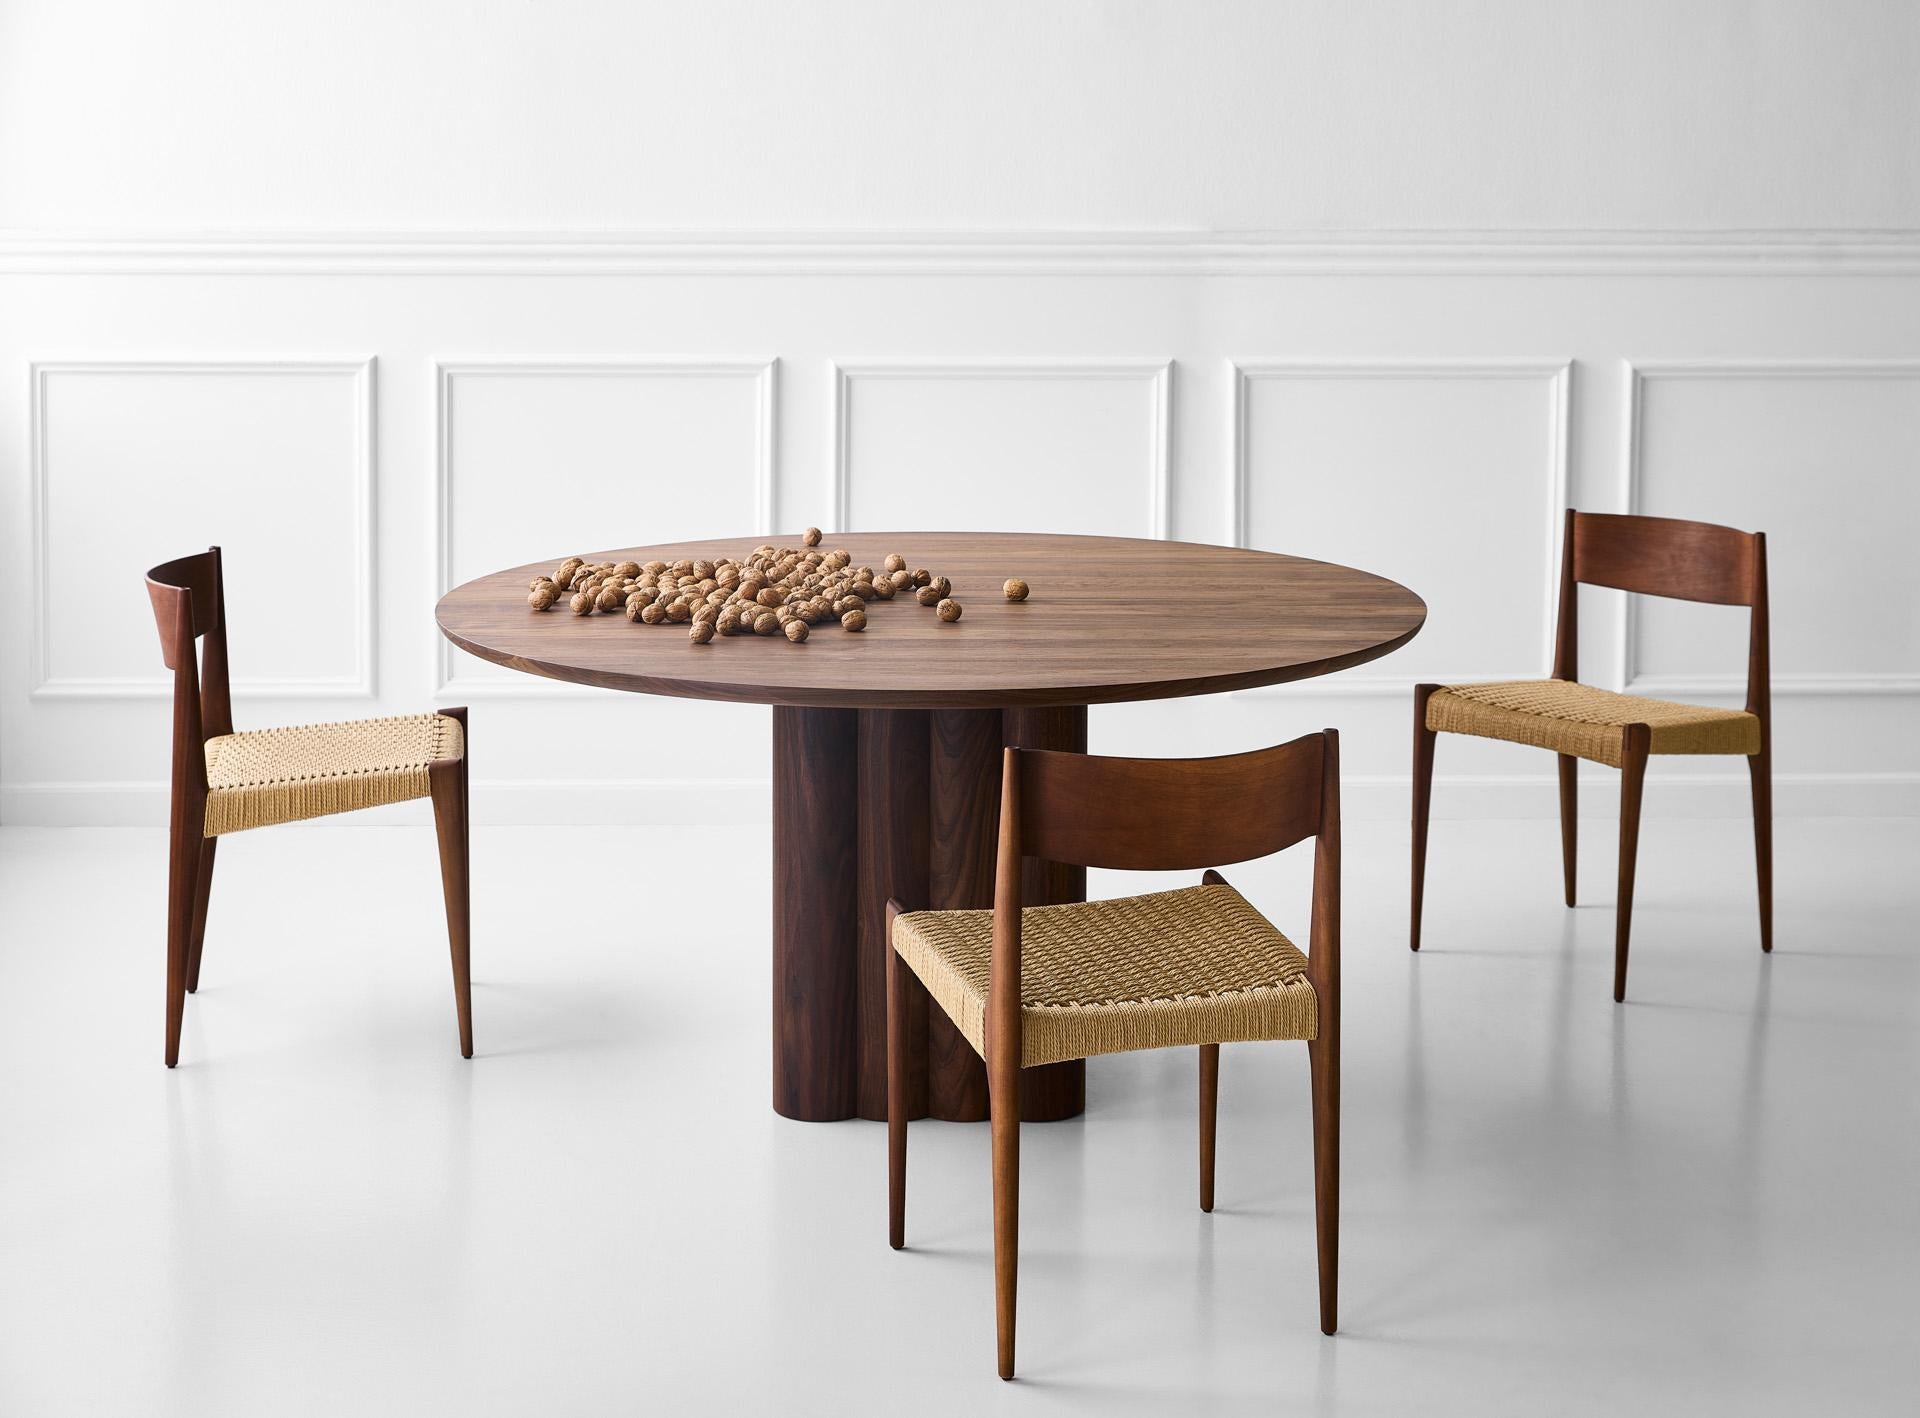 PLUSH dining table, round, 160 cm.
Solid wood table top and legs. Handmade in Denmark. 
Signed by Jacob Plejdrup for DK3

Table's height: 72 or 74 cm

Sold model: 
Natural Oak (oil treatment)
Cube base: 46x46 cm
Table top Thickness: 30